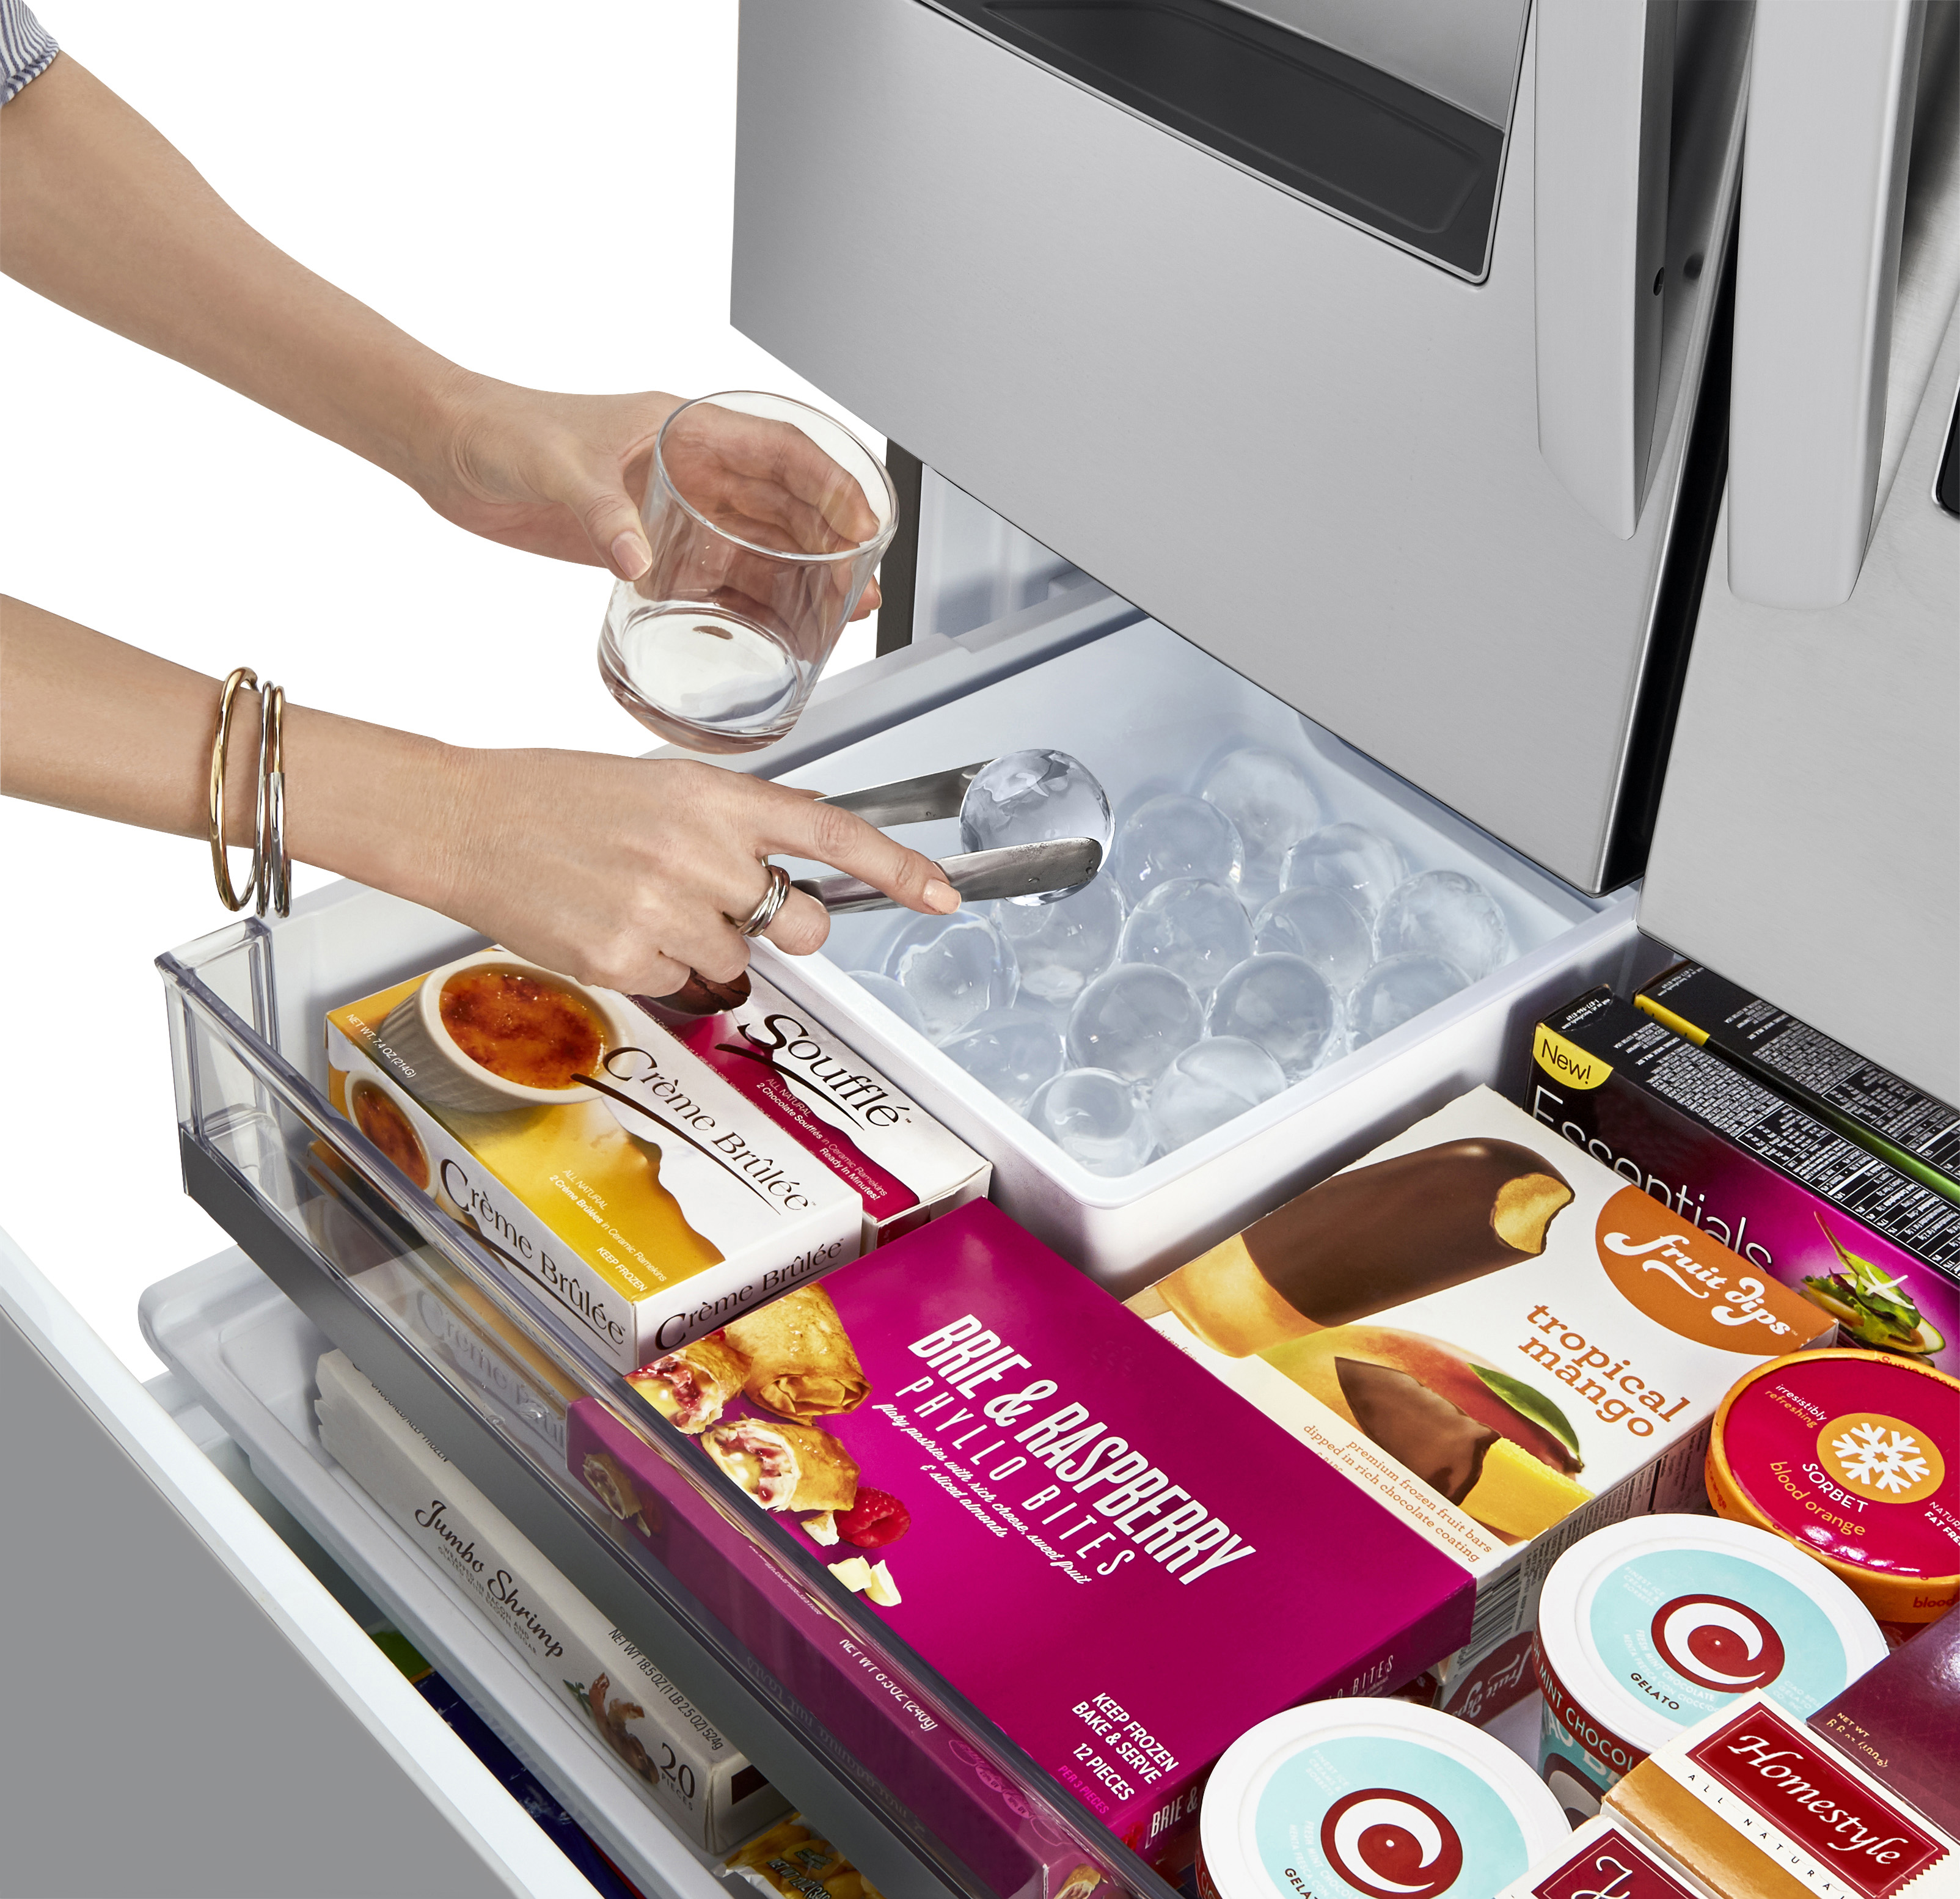 LG product image of woman using Craft Ice feature on stainless steel LRFVC2406S French door refrigerator